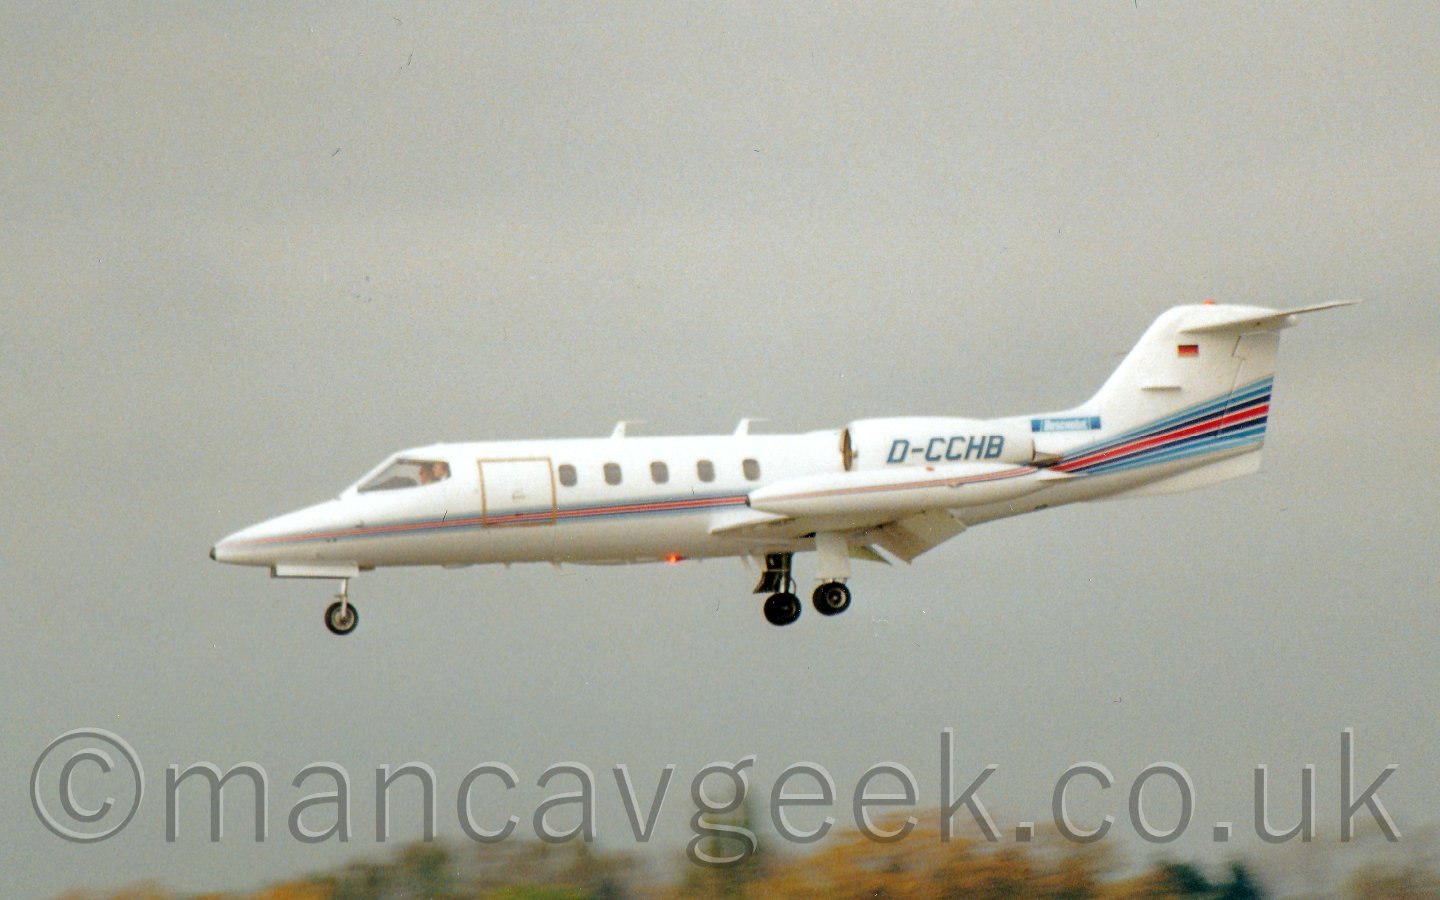 Side view of a white, twin engined bizjet flying from left to right at a low altitude, with undercarriage extednded, flaps deployed from behind the wings, and the nose pointed down slightly, suggesting it is just about to land, with trees at the bottom of the frame, and grey sky filling the rest.